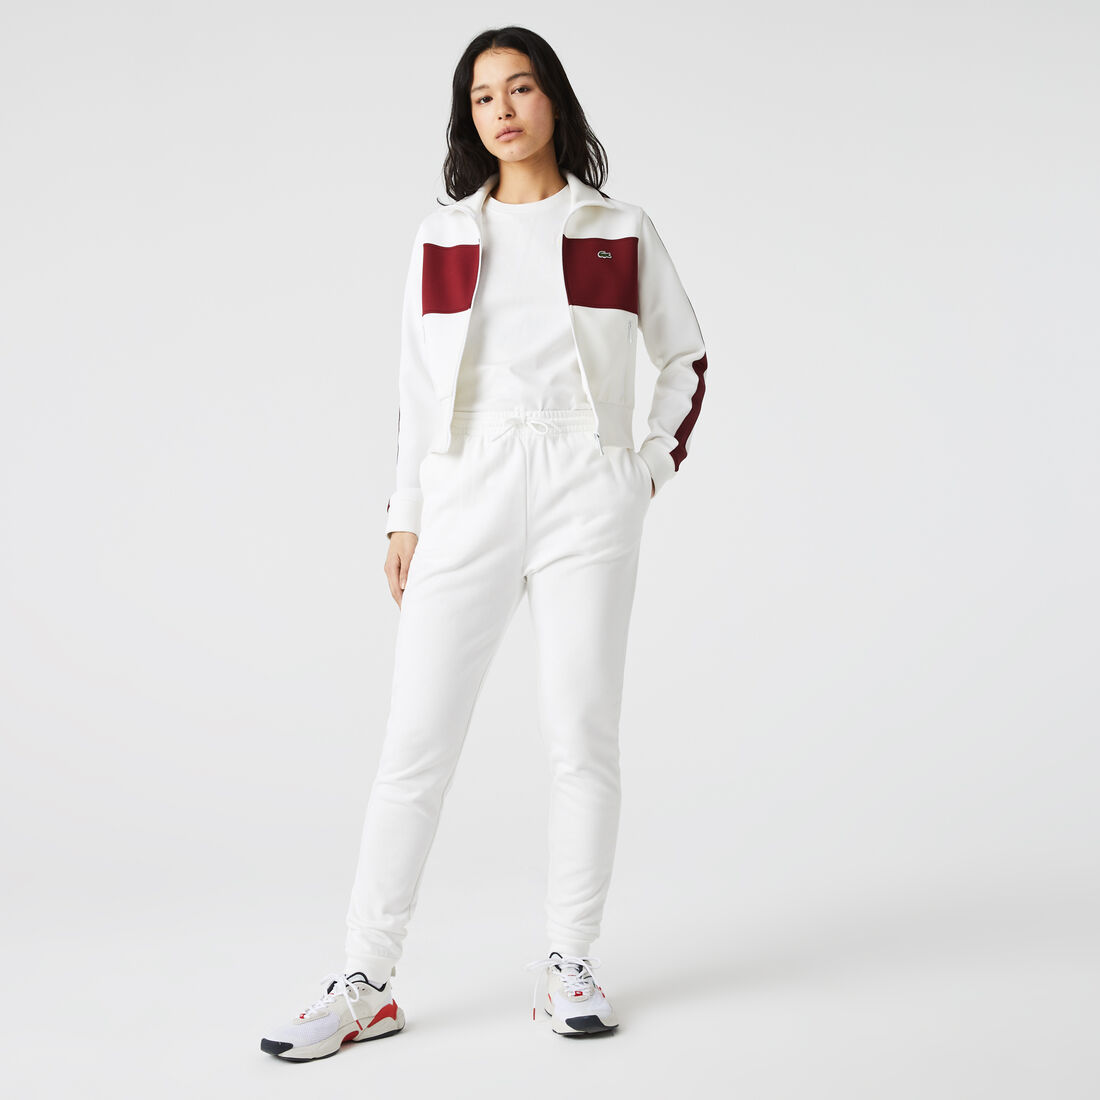 Lacoste Pants Clearance - Lacoste USA Online